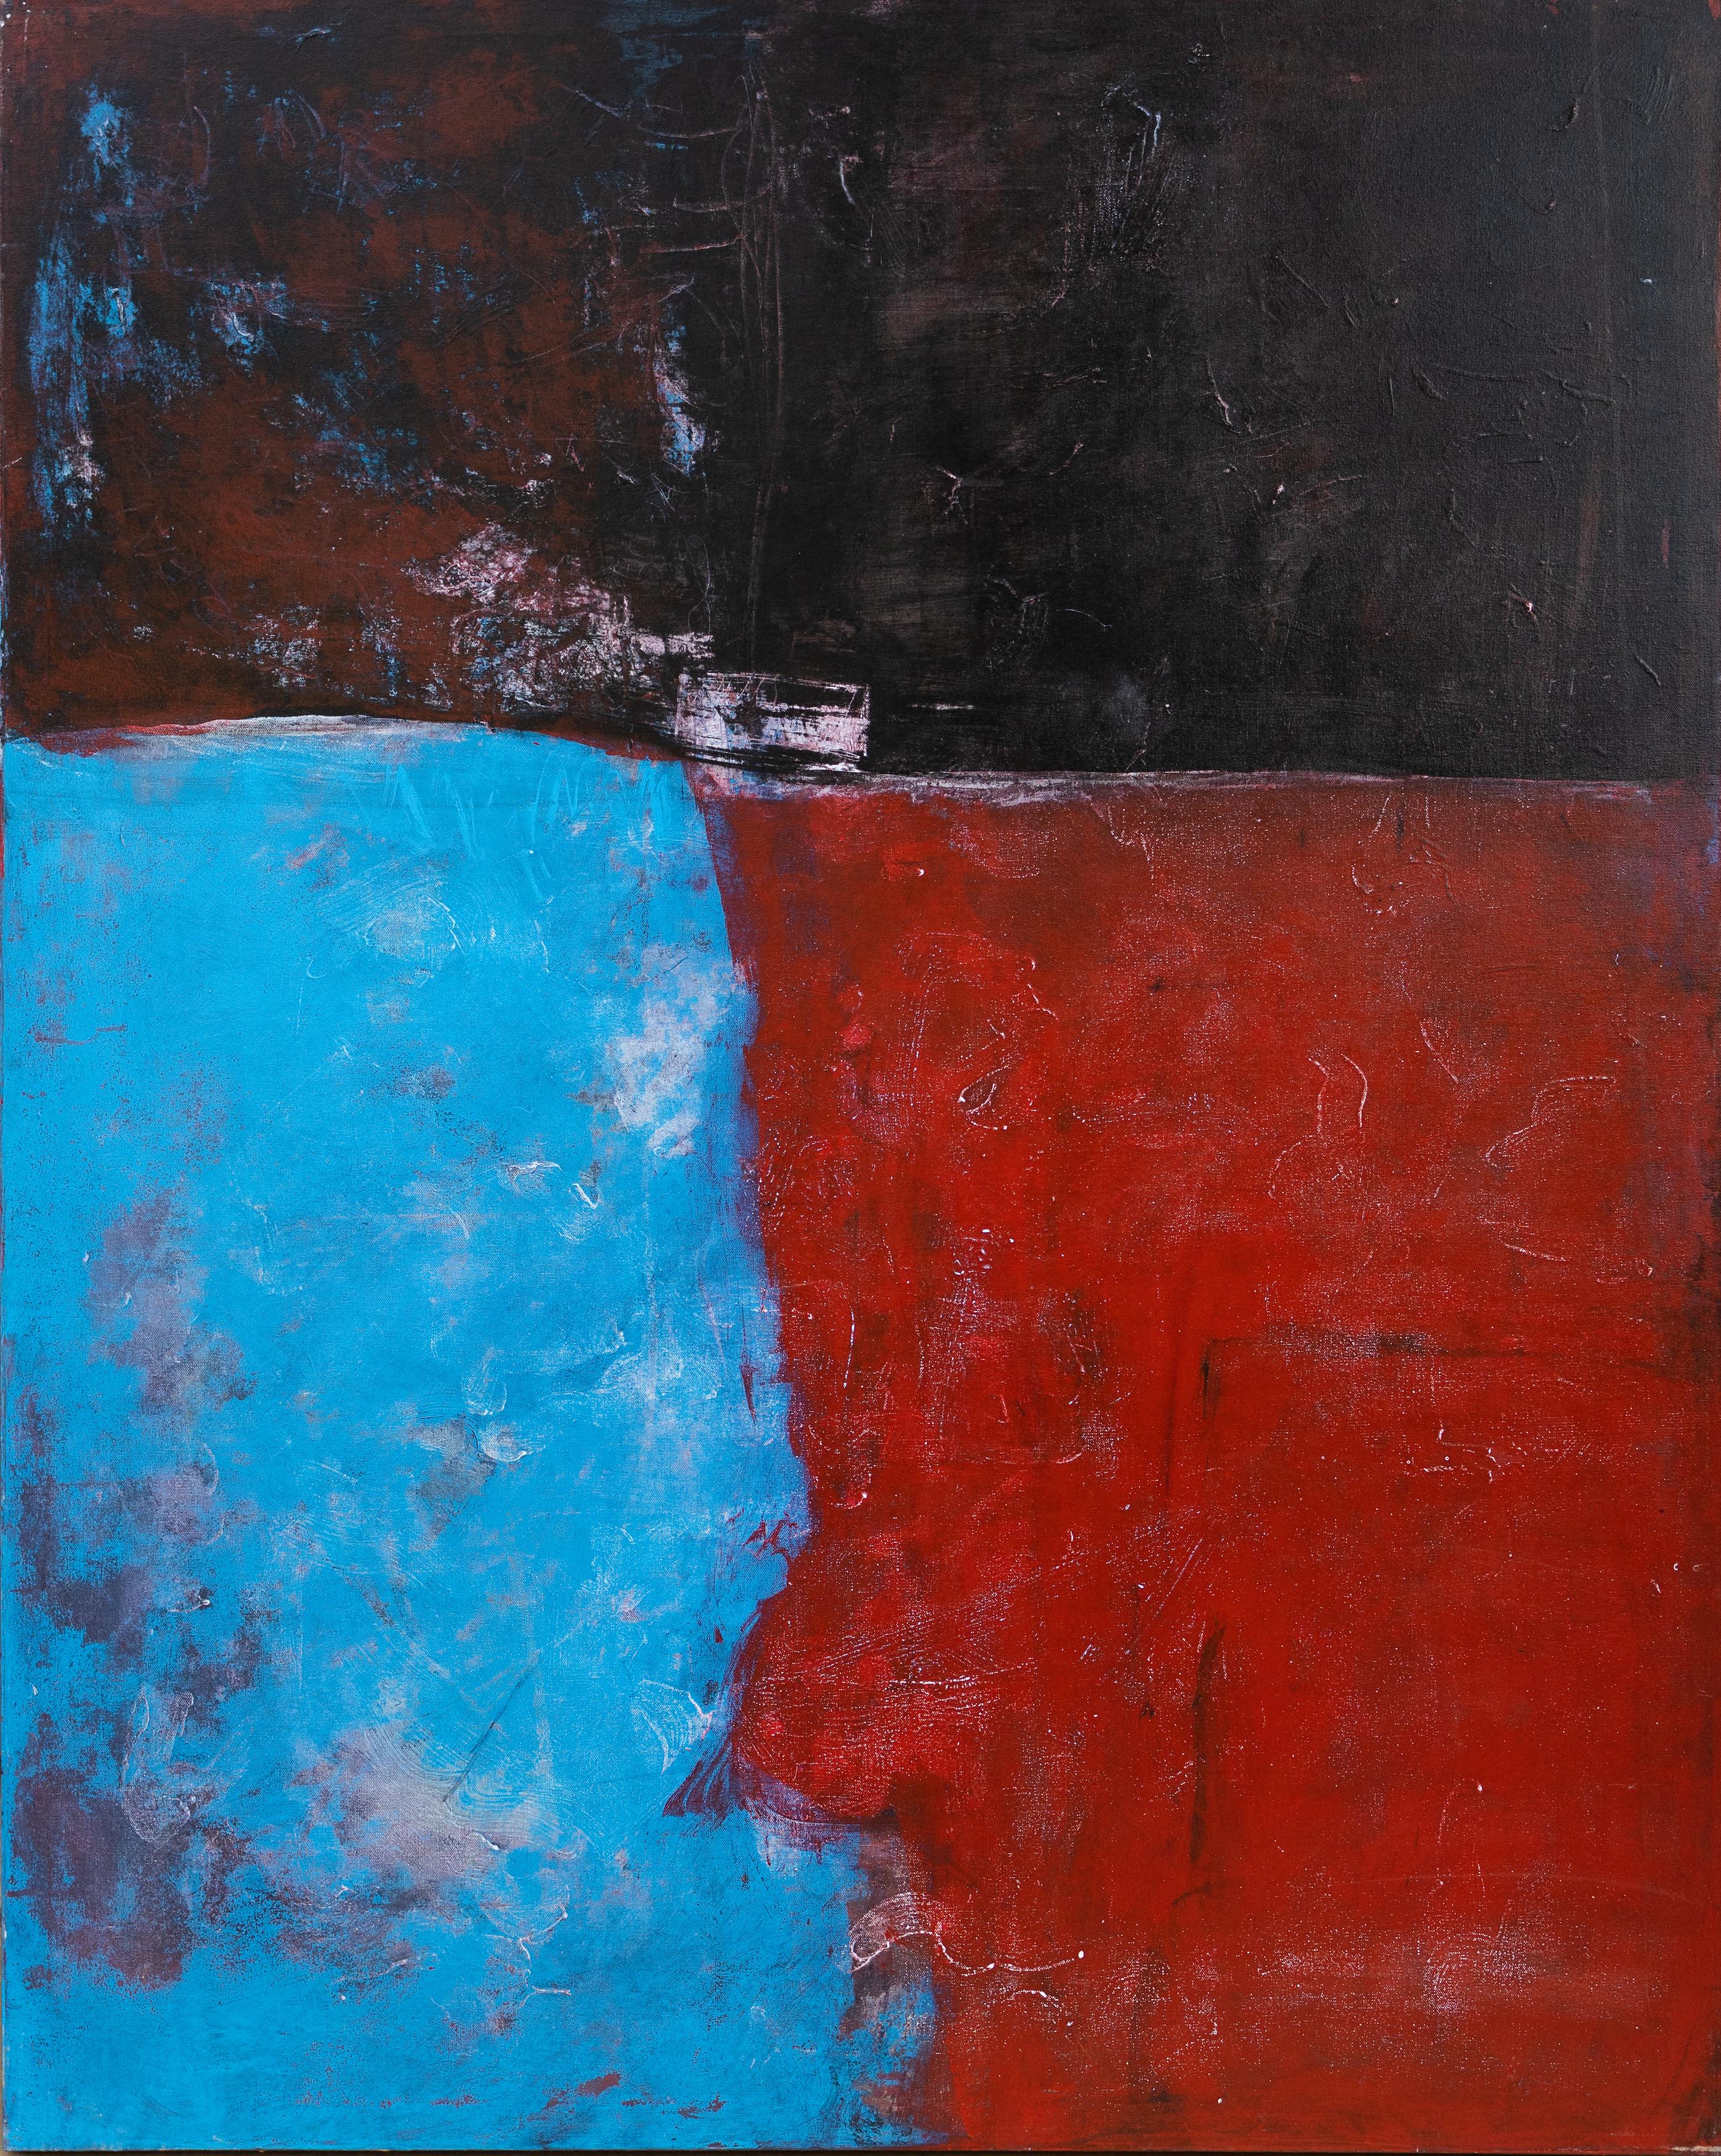 Tom Reno Abstract Painting - "Abstract #4" - Red, Black, and Blue